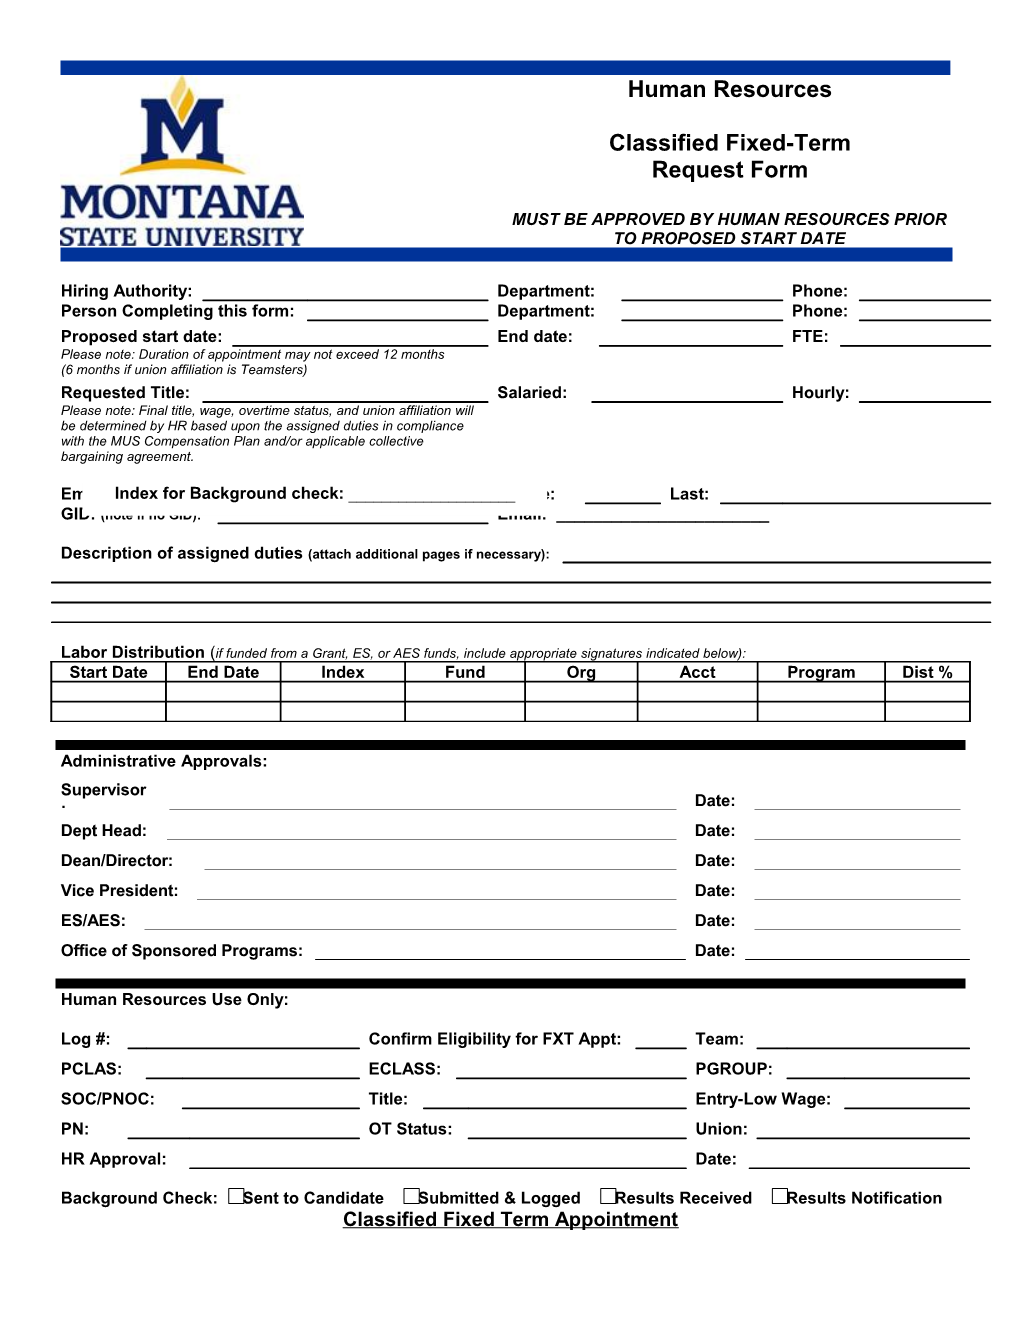 Temporary Hourly Non-Classified Appointment Form